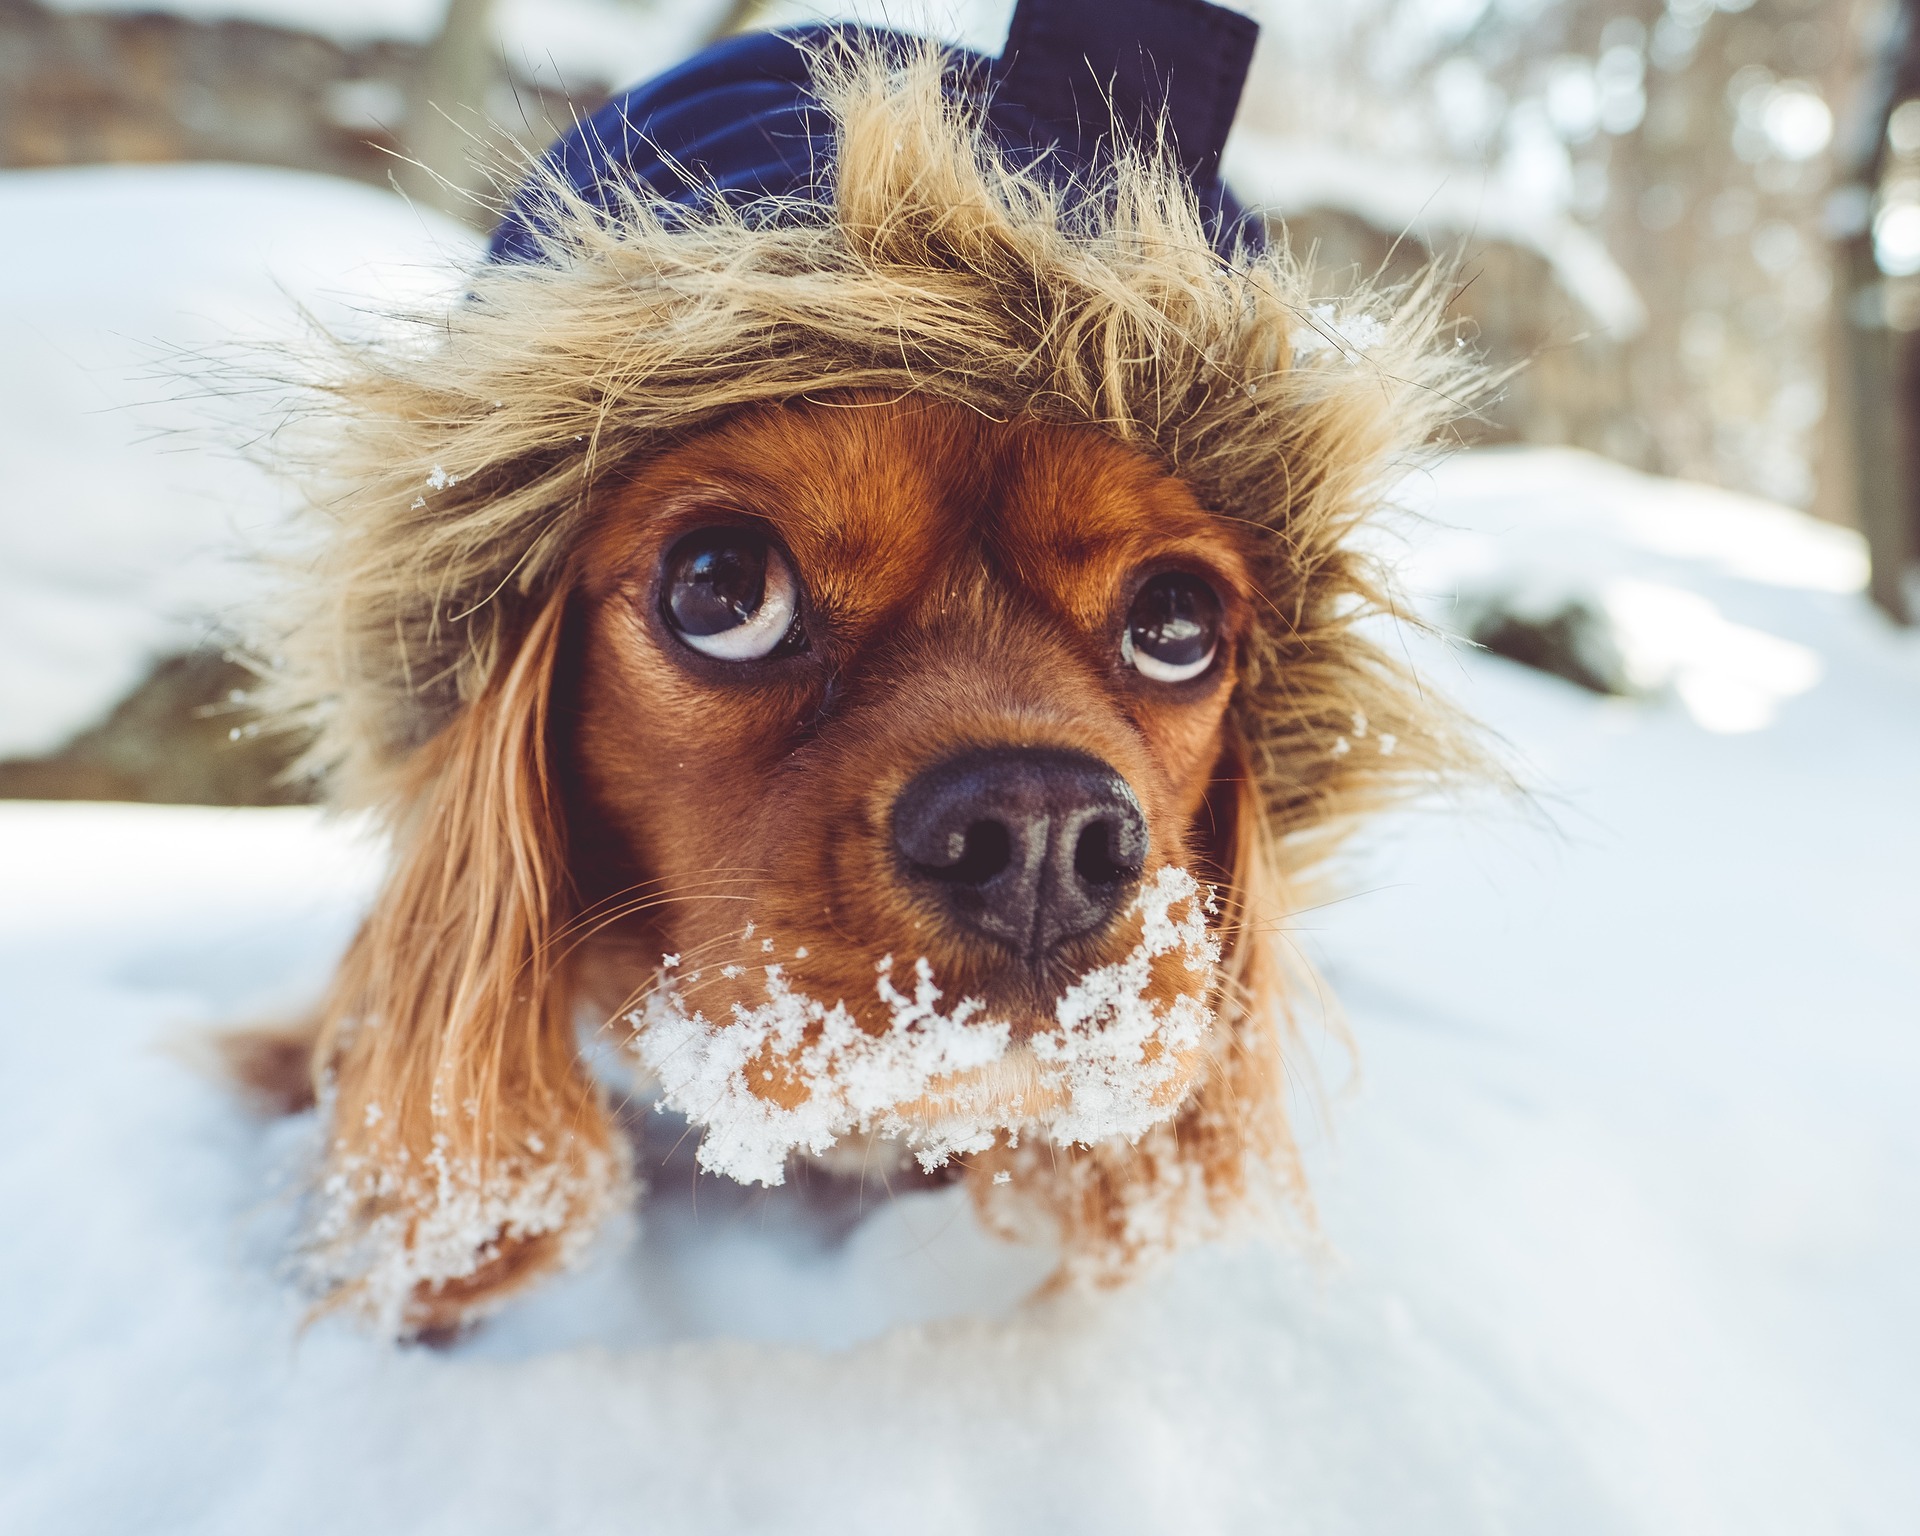 Protect Those Dog Paws This Winter!